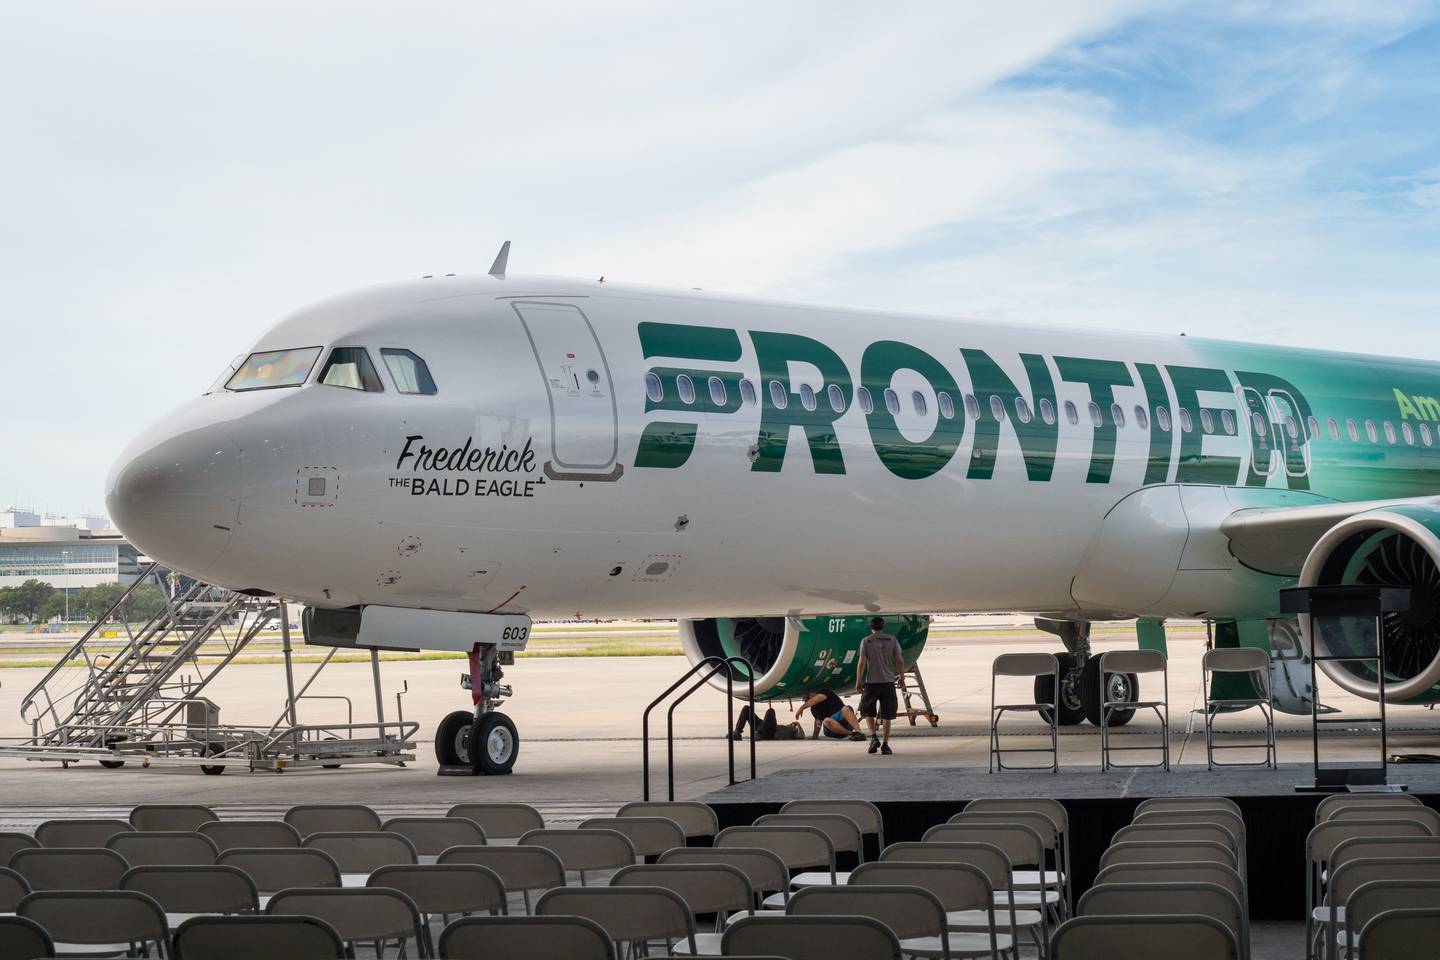 Frontier Airlines offers a "Go Wild" pass that lets customers book as many trips as they want.